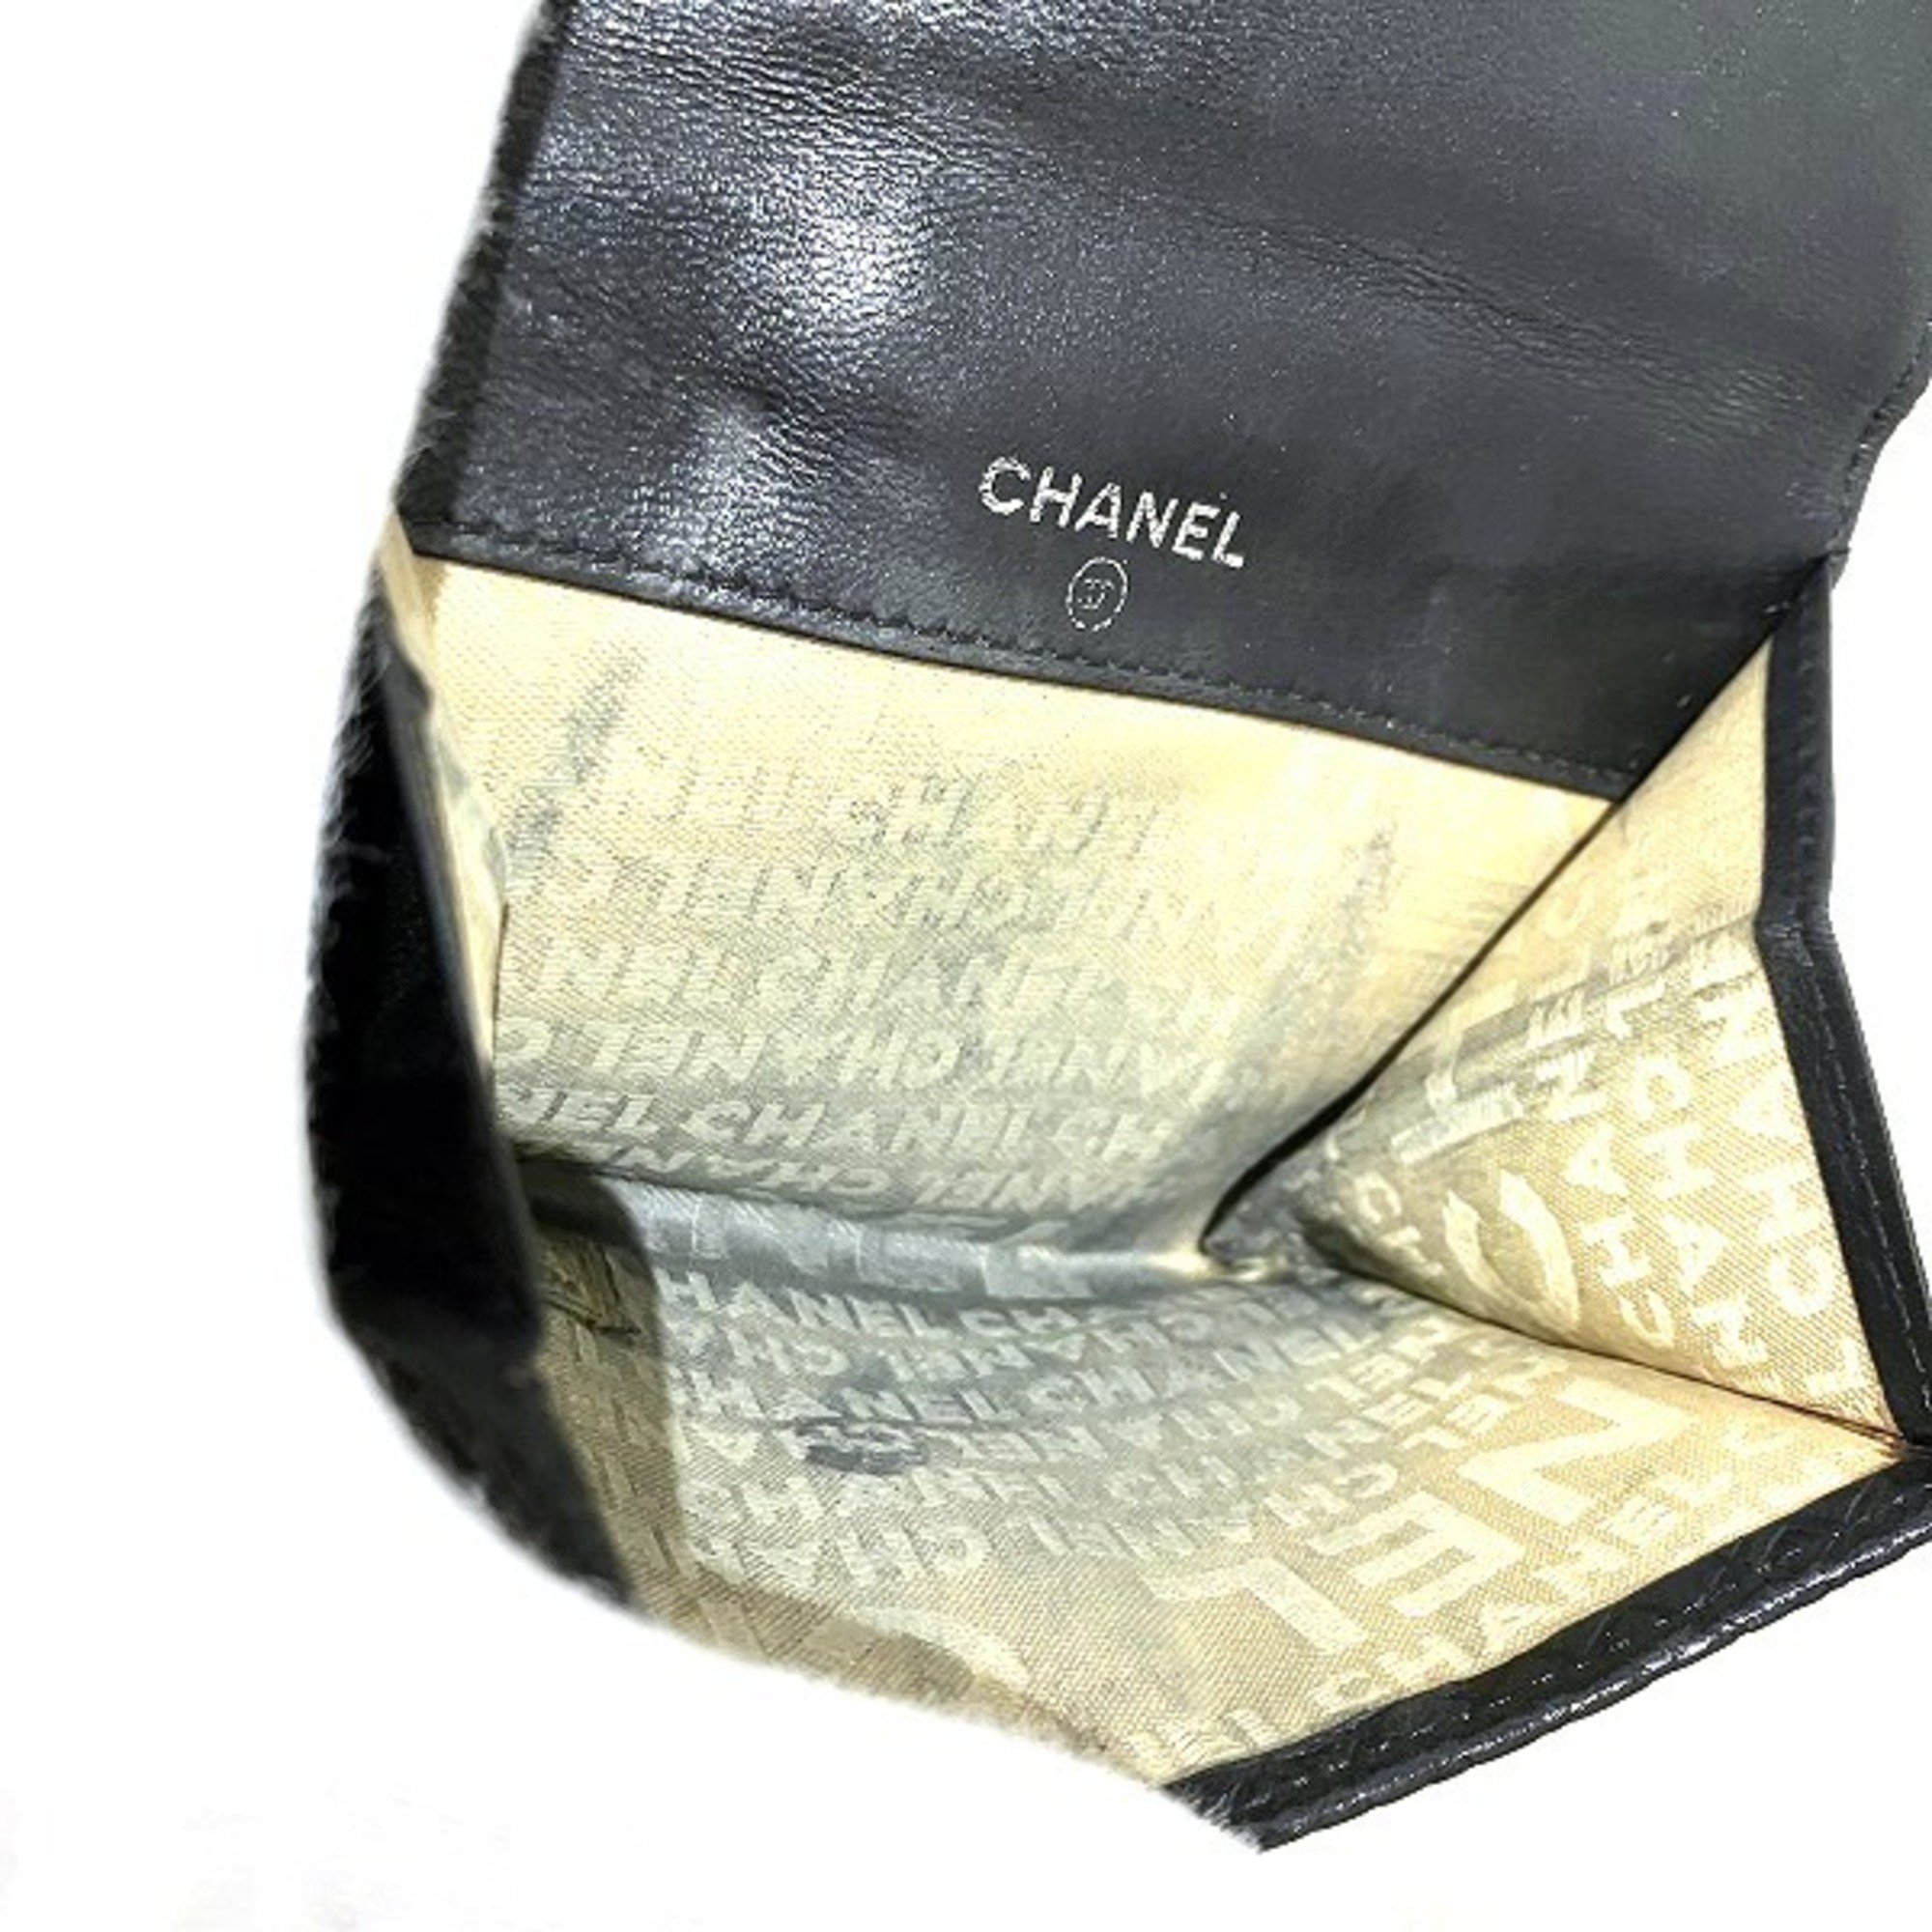 CHANEL Micro Chocolate Bar Black x Beige Leather Bi-fold Wallet for Men and Women